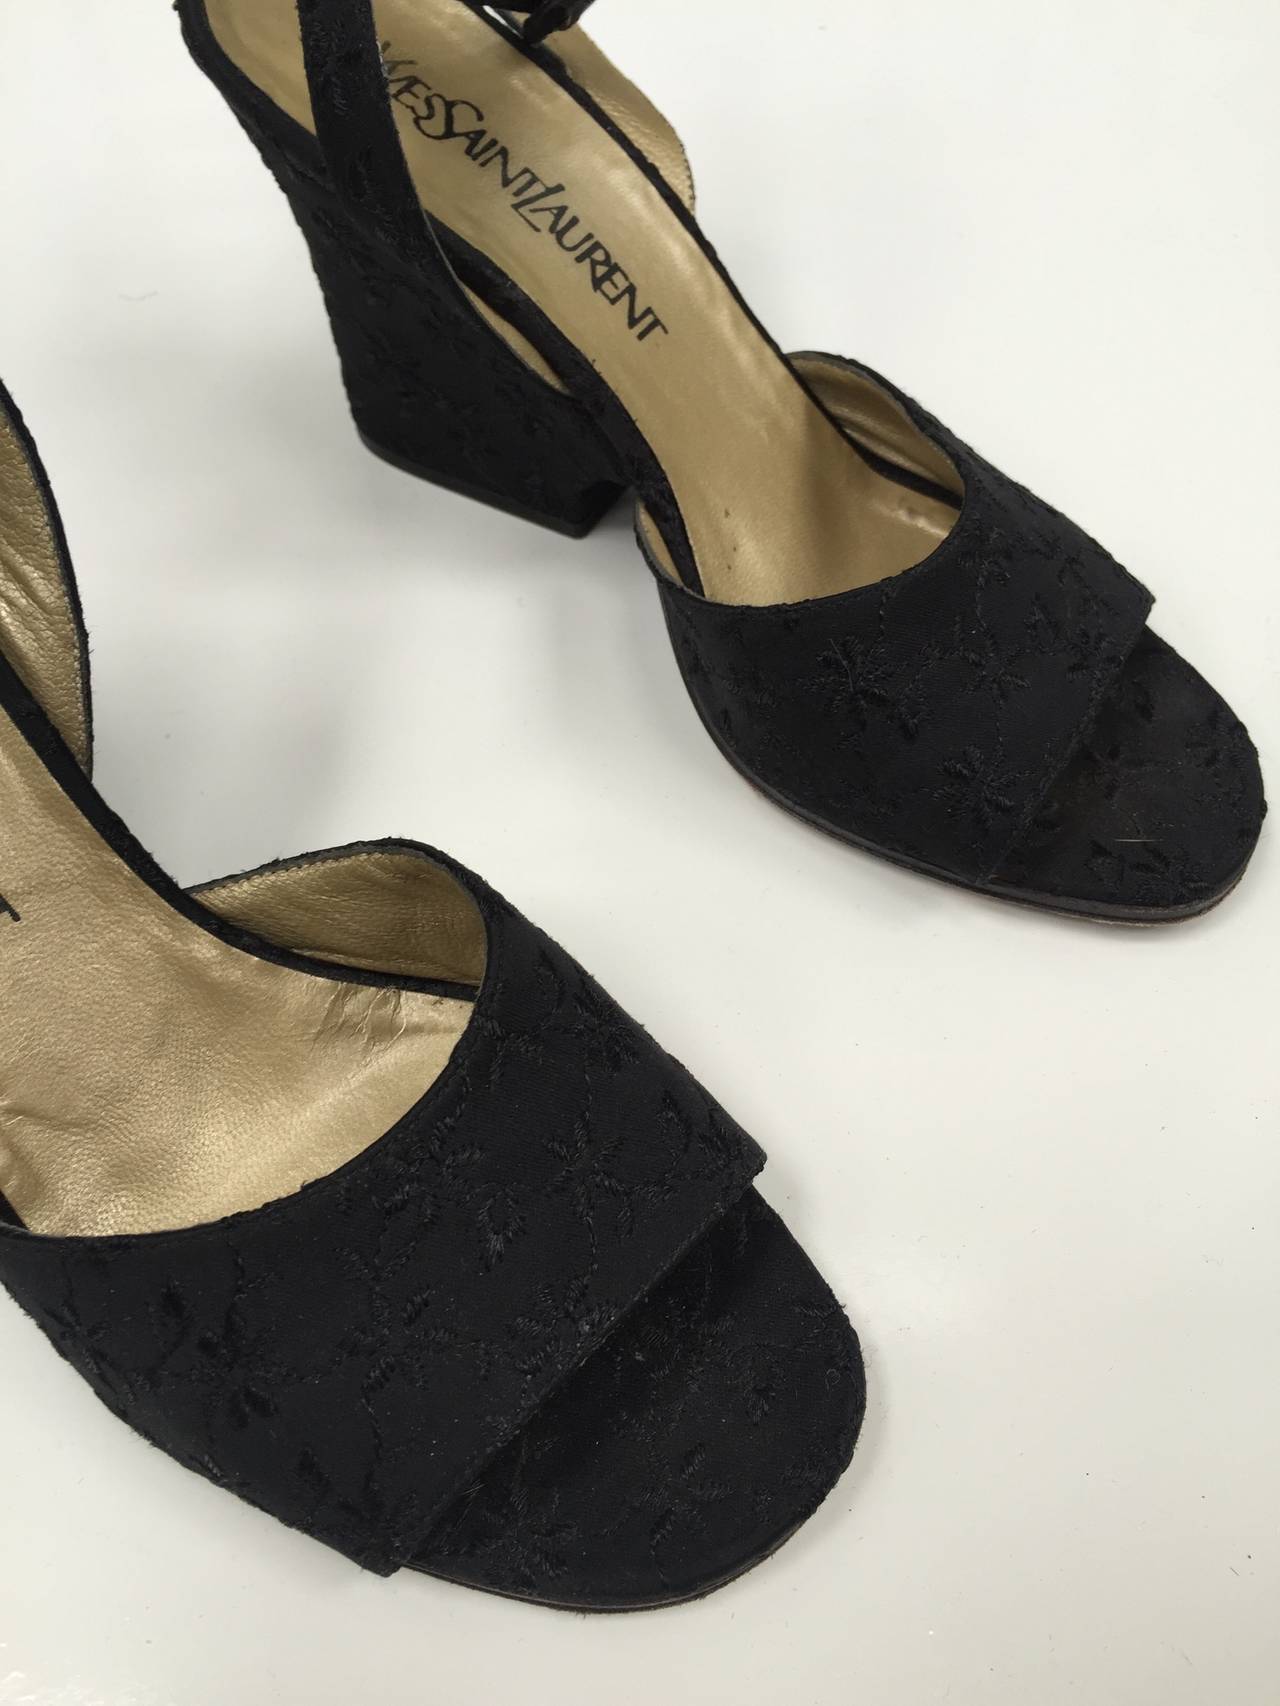 Yves Saint Laurent 1980s black brocade ankle strap shoes size 7.5 M. 3.5" heel.
Made in Italy.